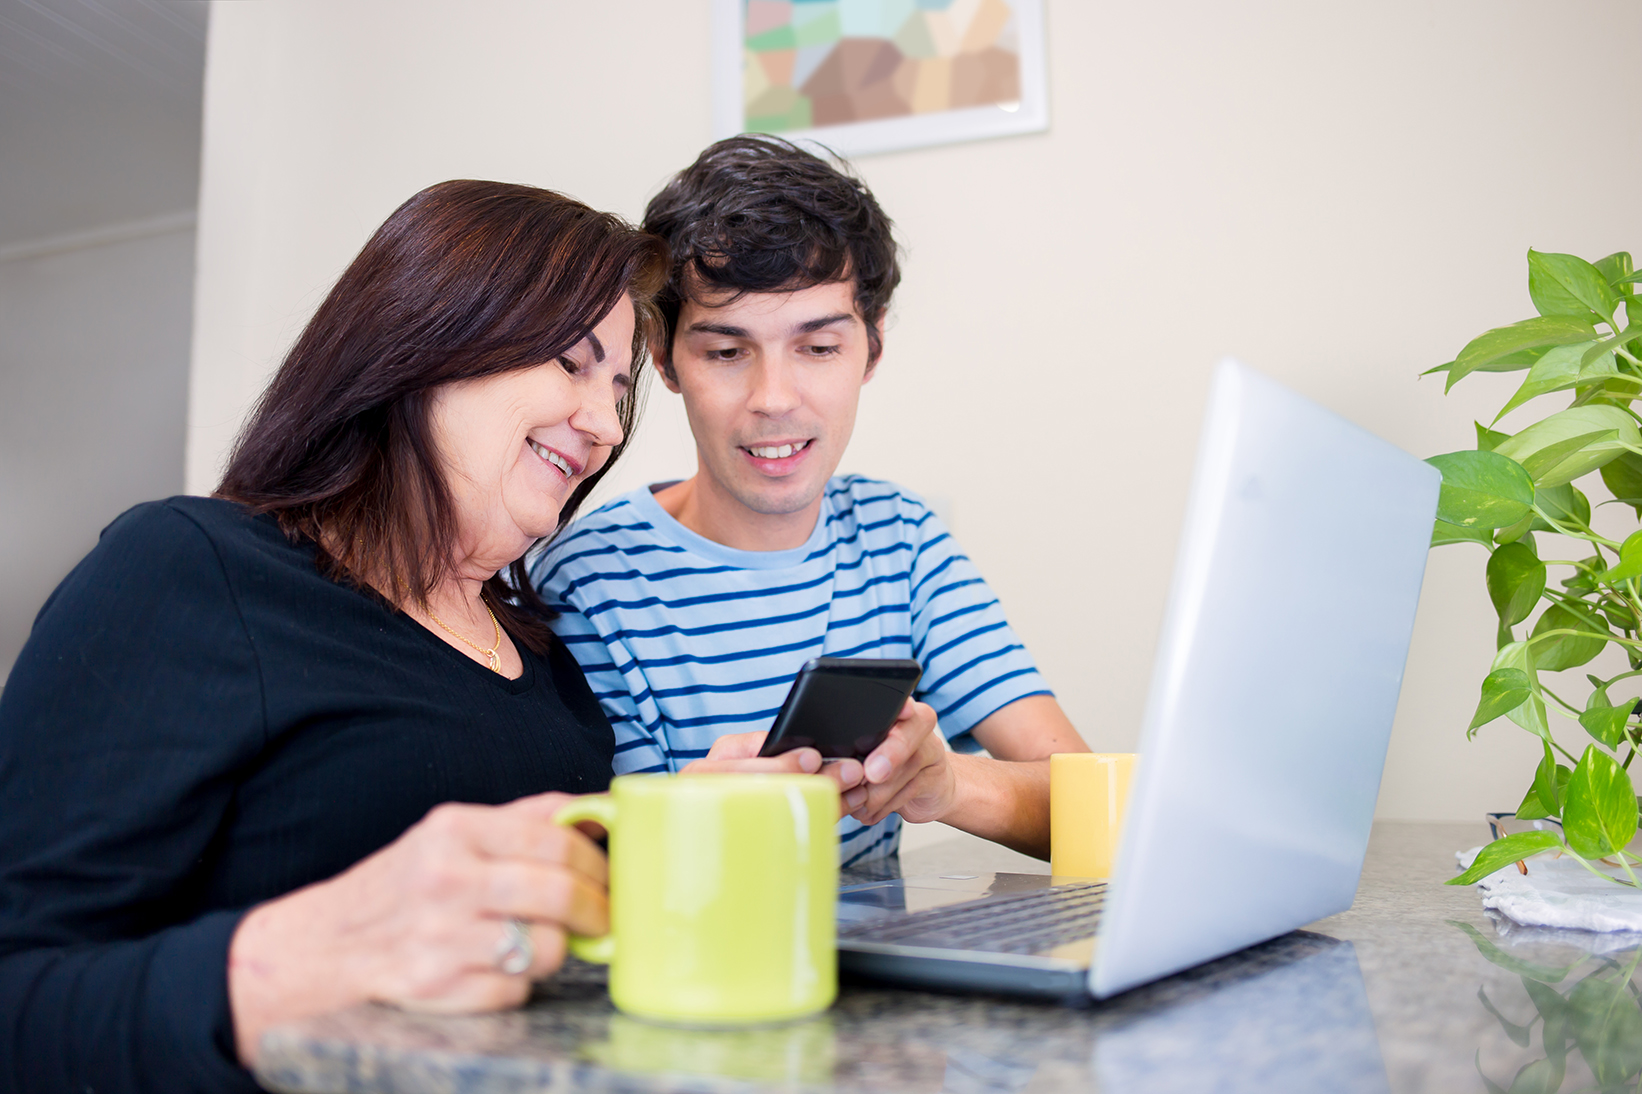 Image of mother working with student at laptop